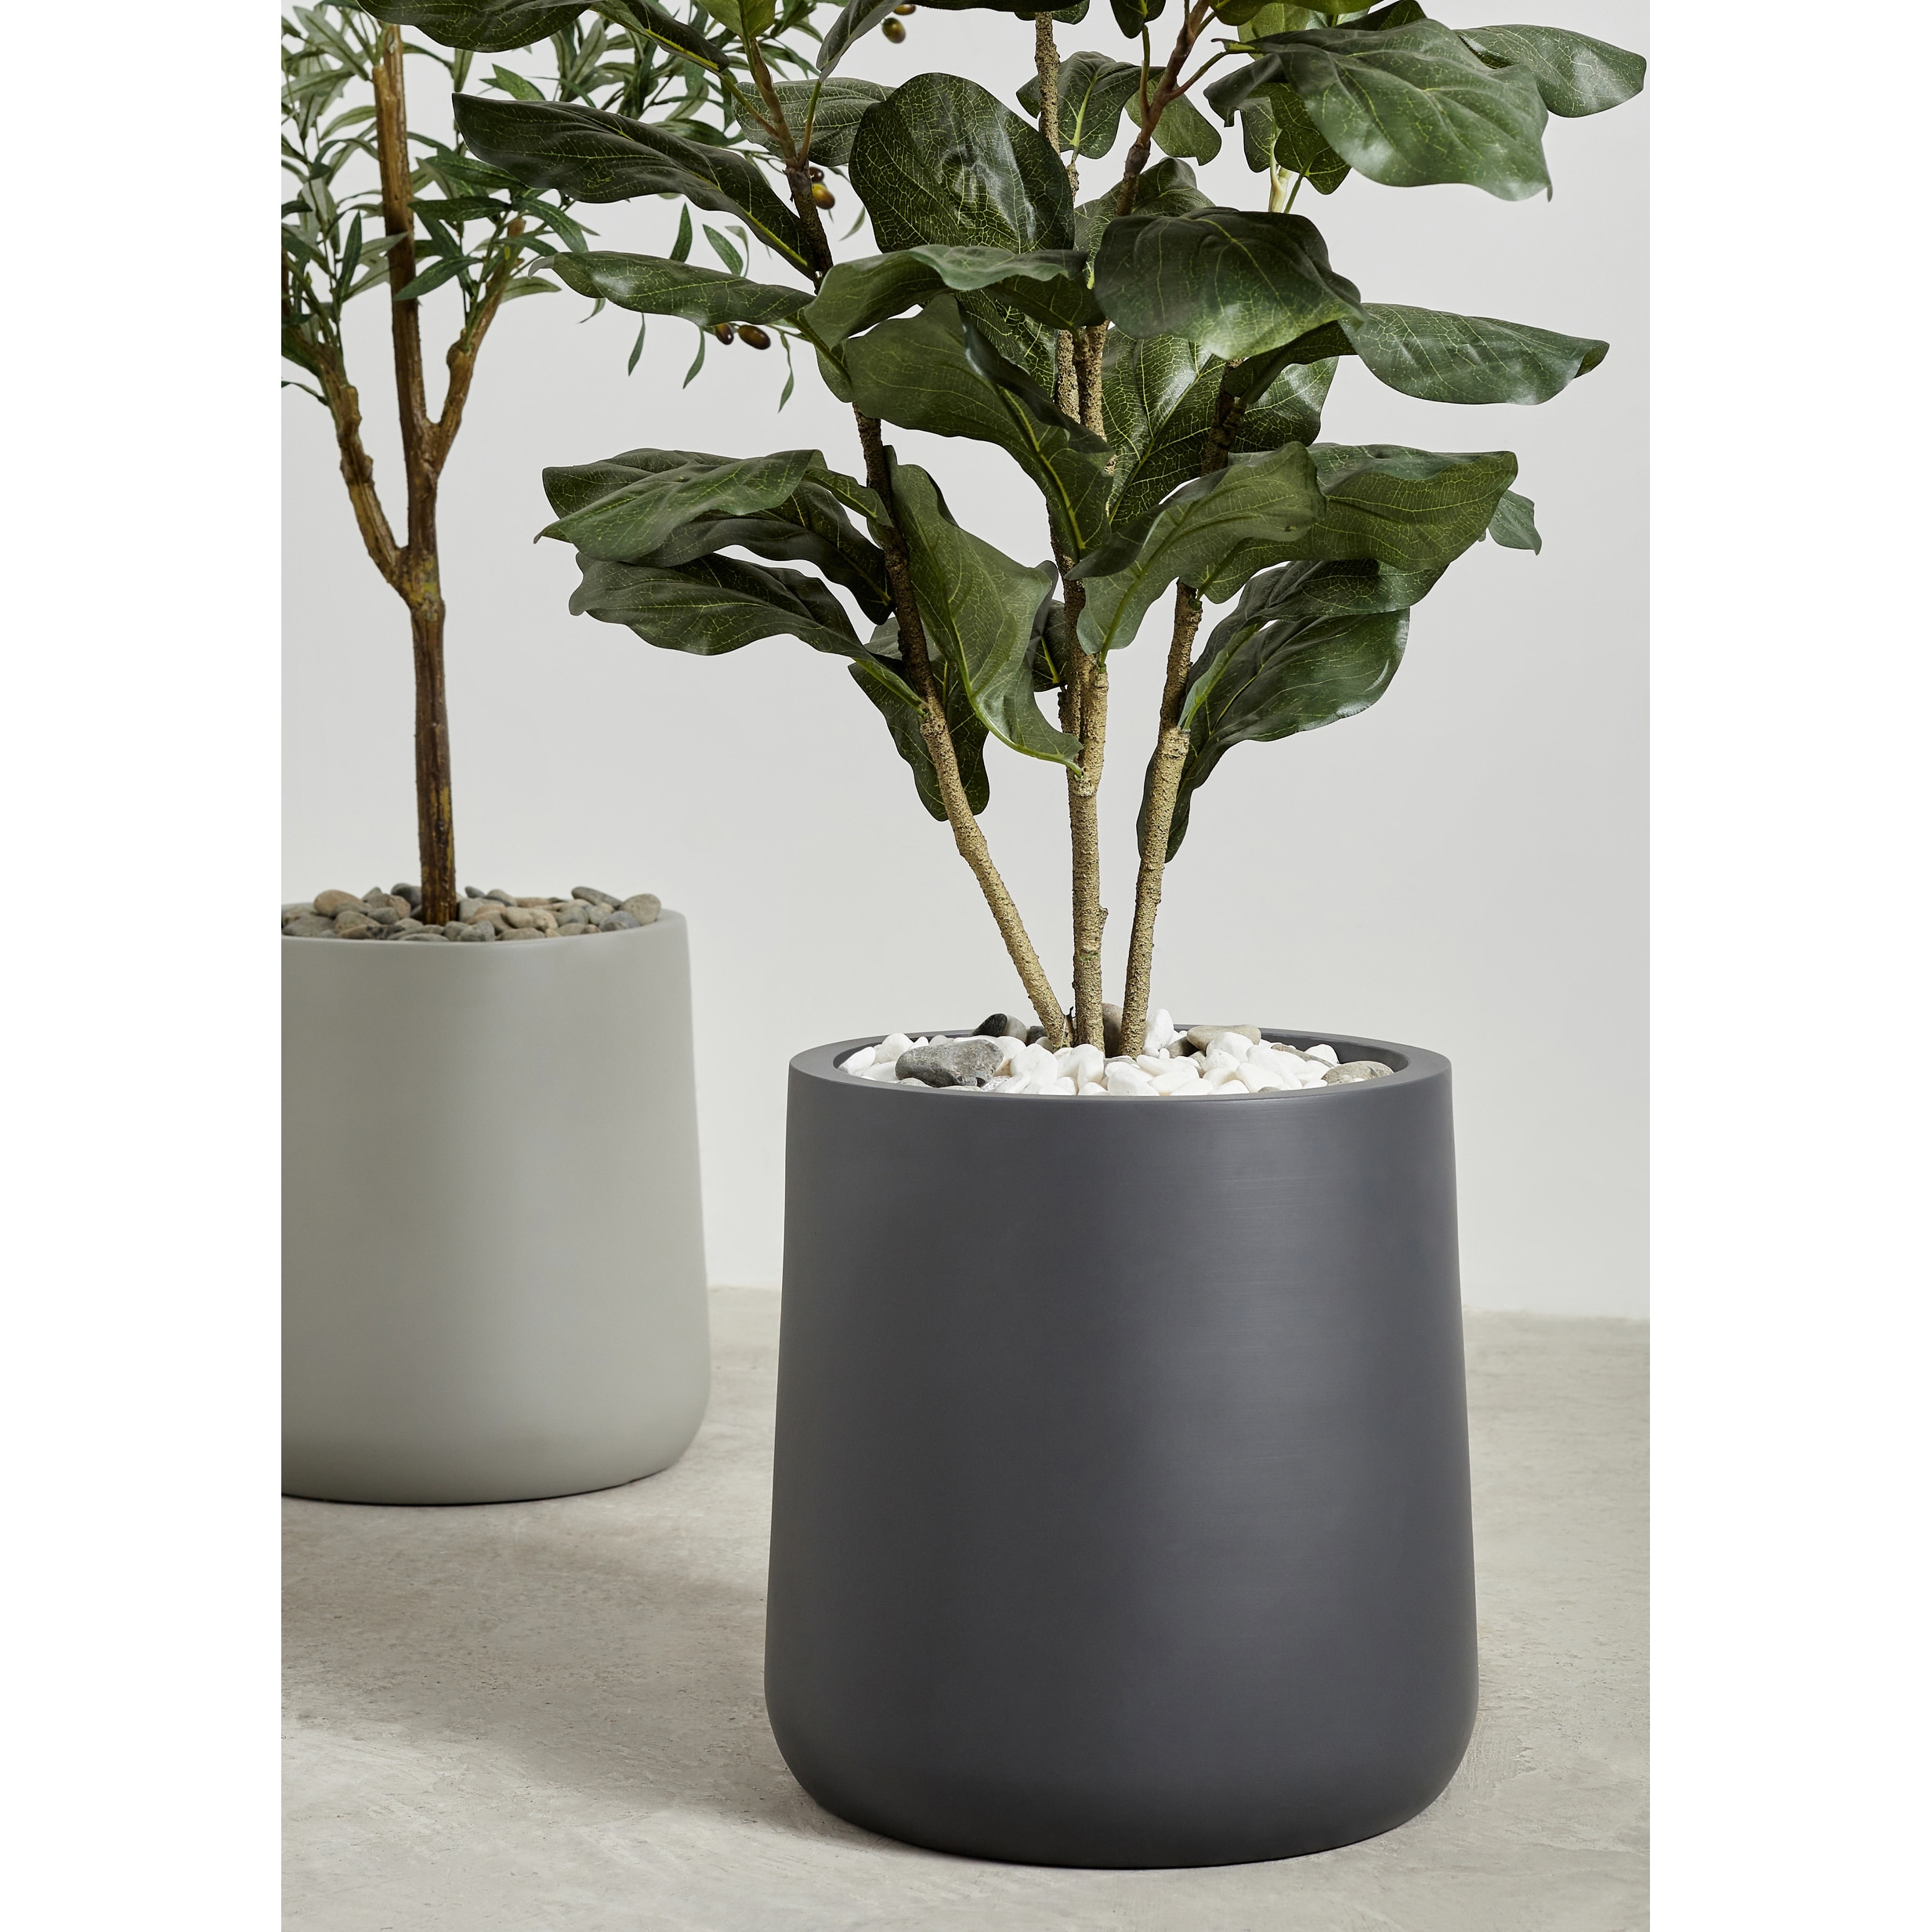 https://ak1.ostkcdn.com/images/products/is/images/direct/74b6479539c400e0401f0770057024d89b83a3b9/Indoor-Outdoor-Large-Nordic-Minimalist-Fiberstone-Lightweight-Round-Planter-Pot---14%2C-11-inch-Matte-Finish.jpg